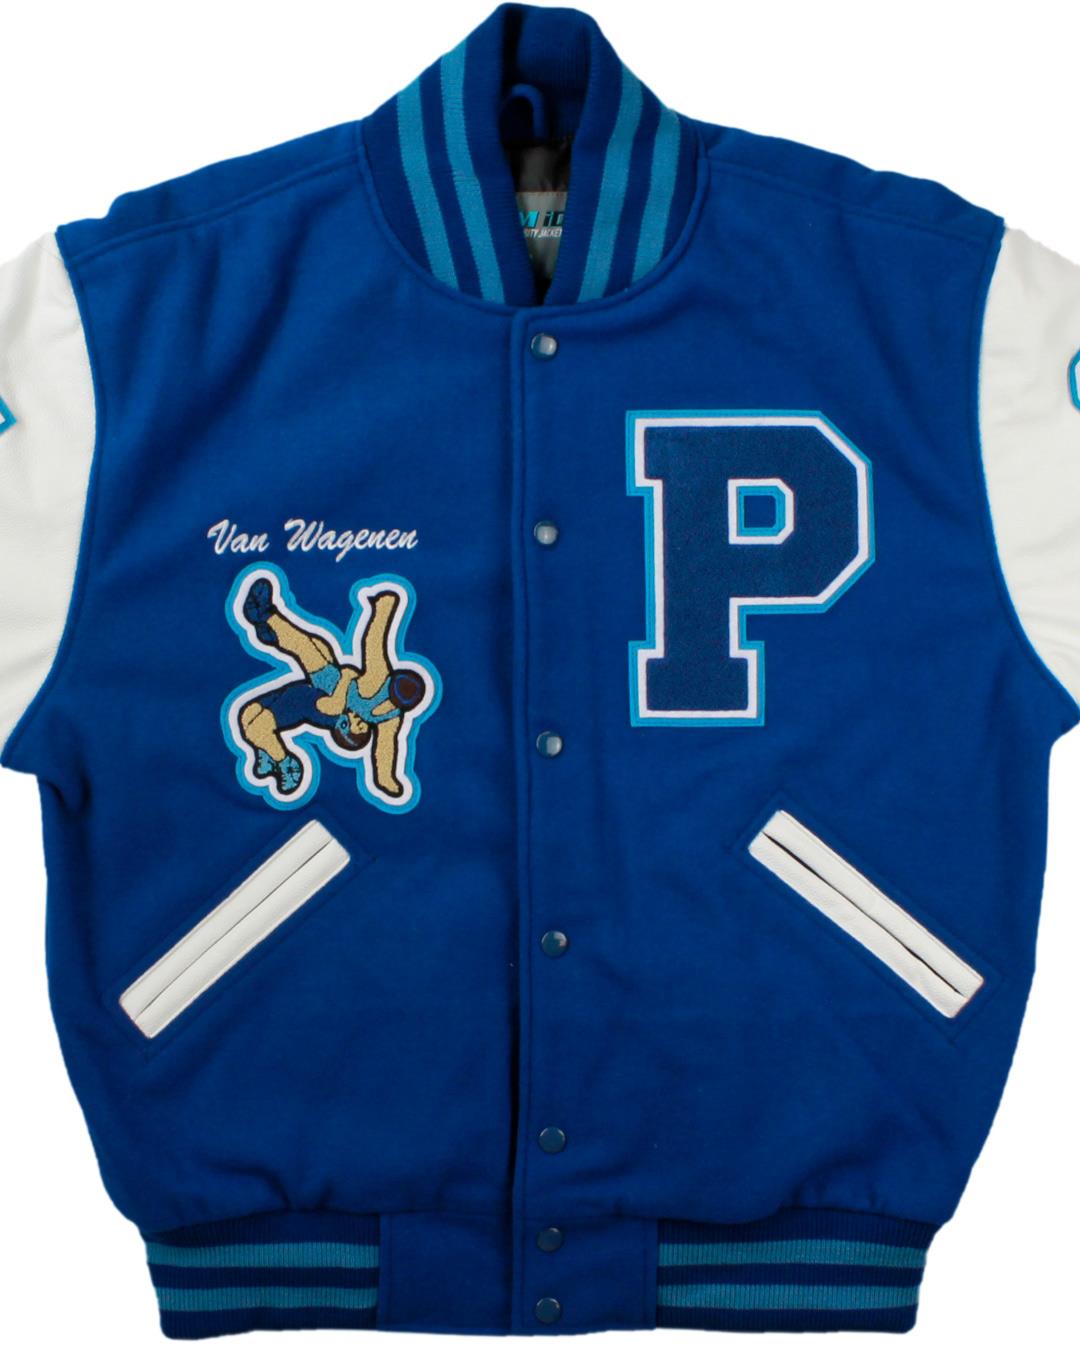 Palisades High School Letterman, Pacific Palisades, CA - Front